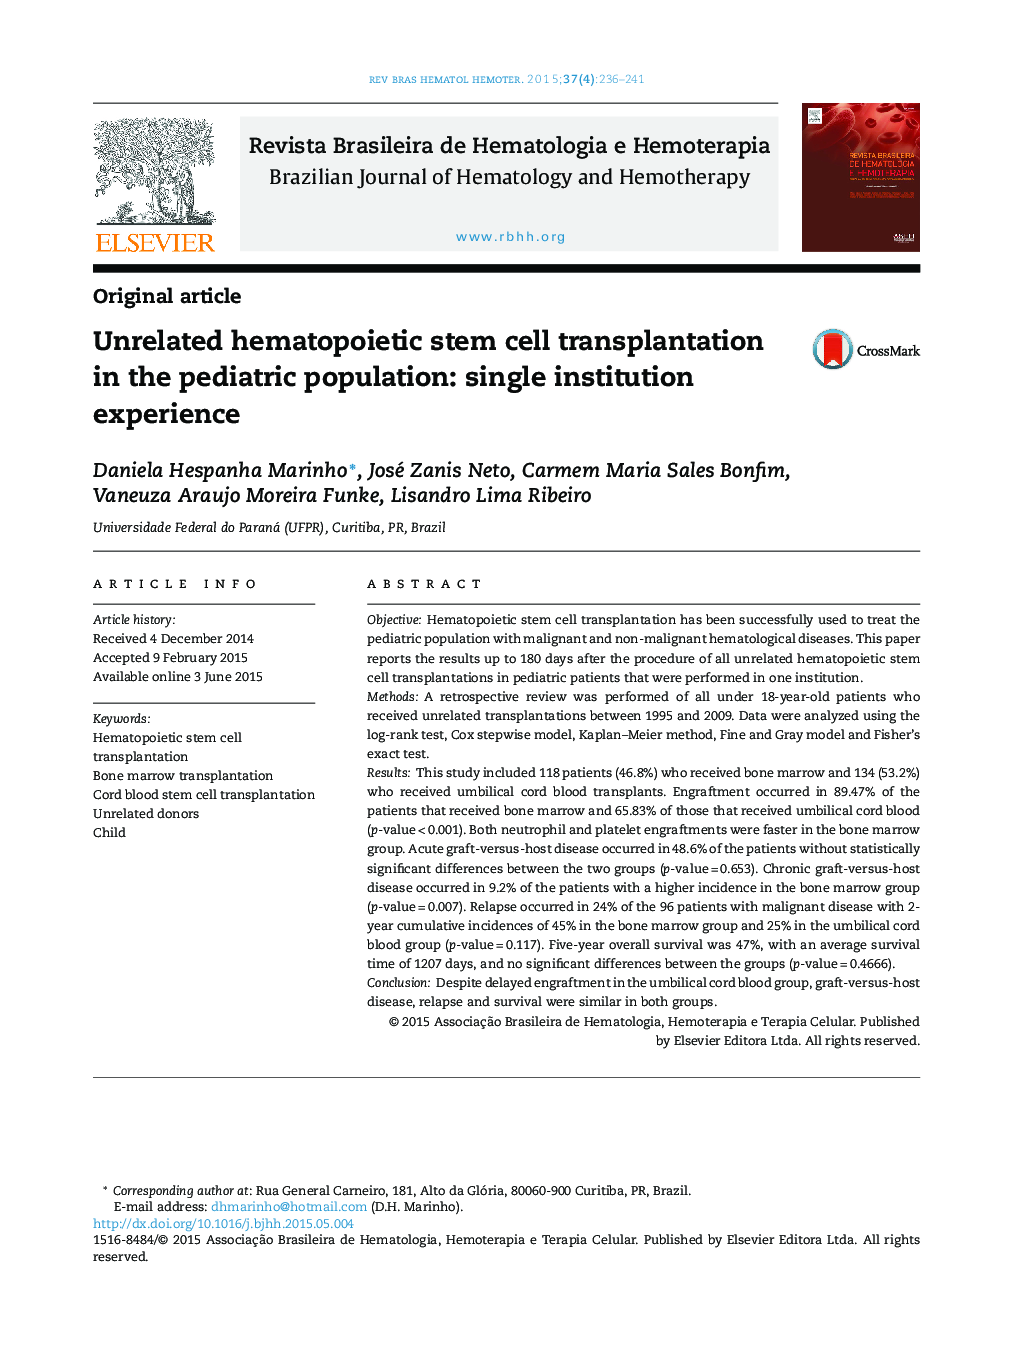 Unrelated hematopoietic stem cell transplantation in the pediatric population: single institution experience